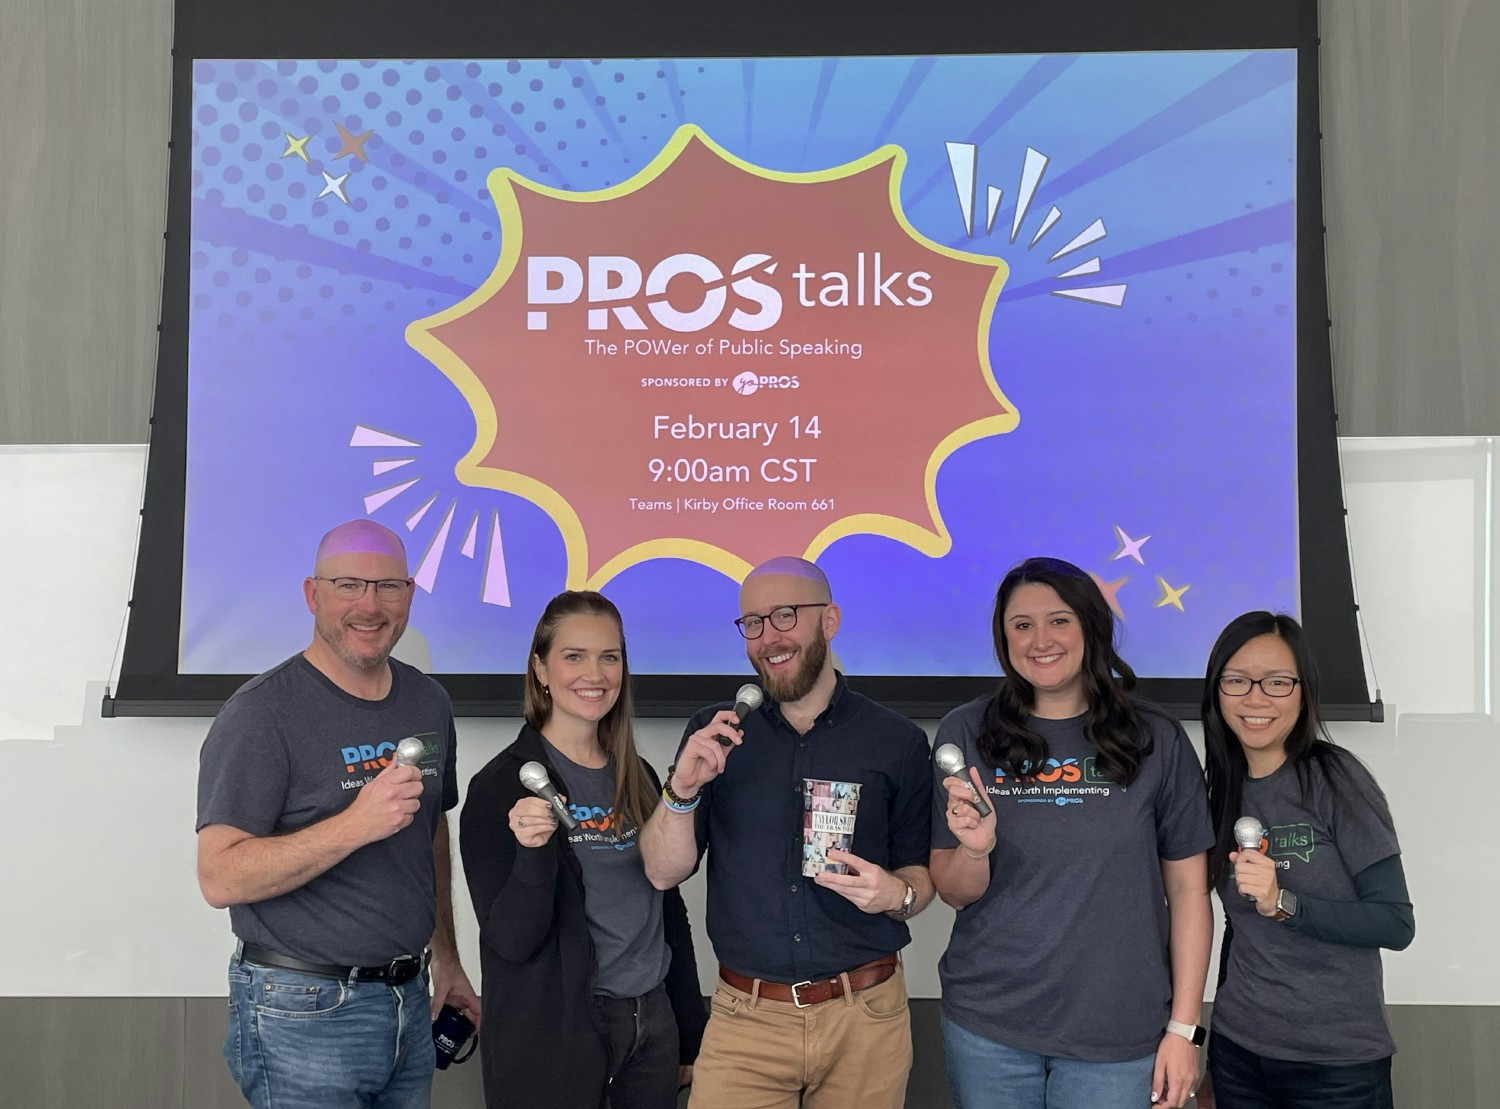 PROS Talks, our version of the global TED Conference, is one of many employee-led events that helps us learn together.